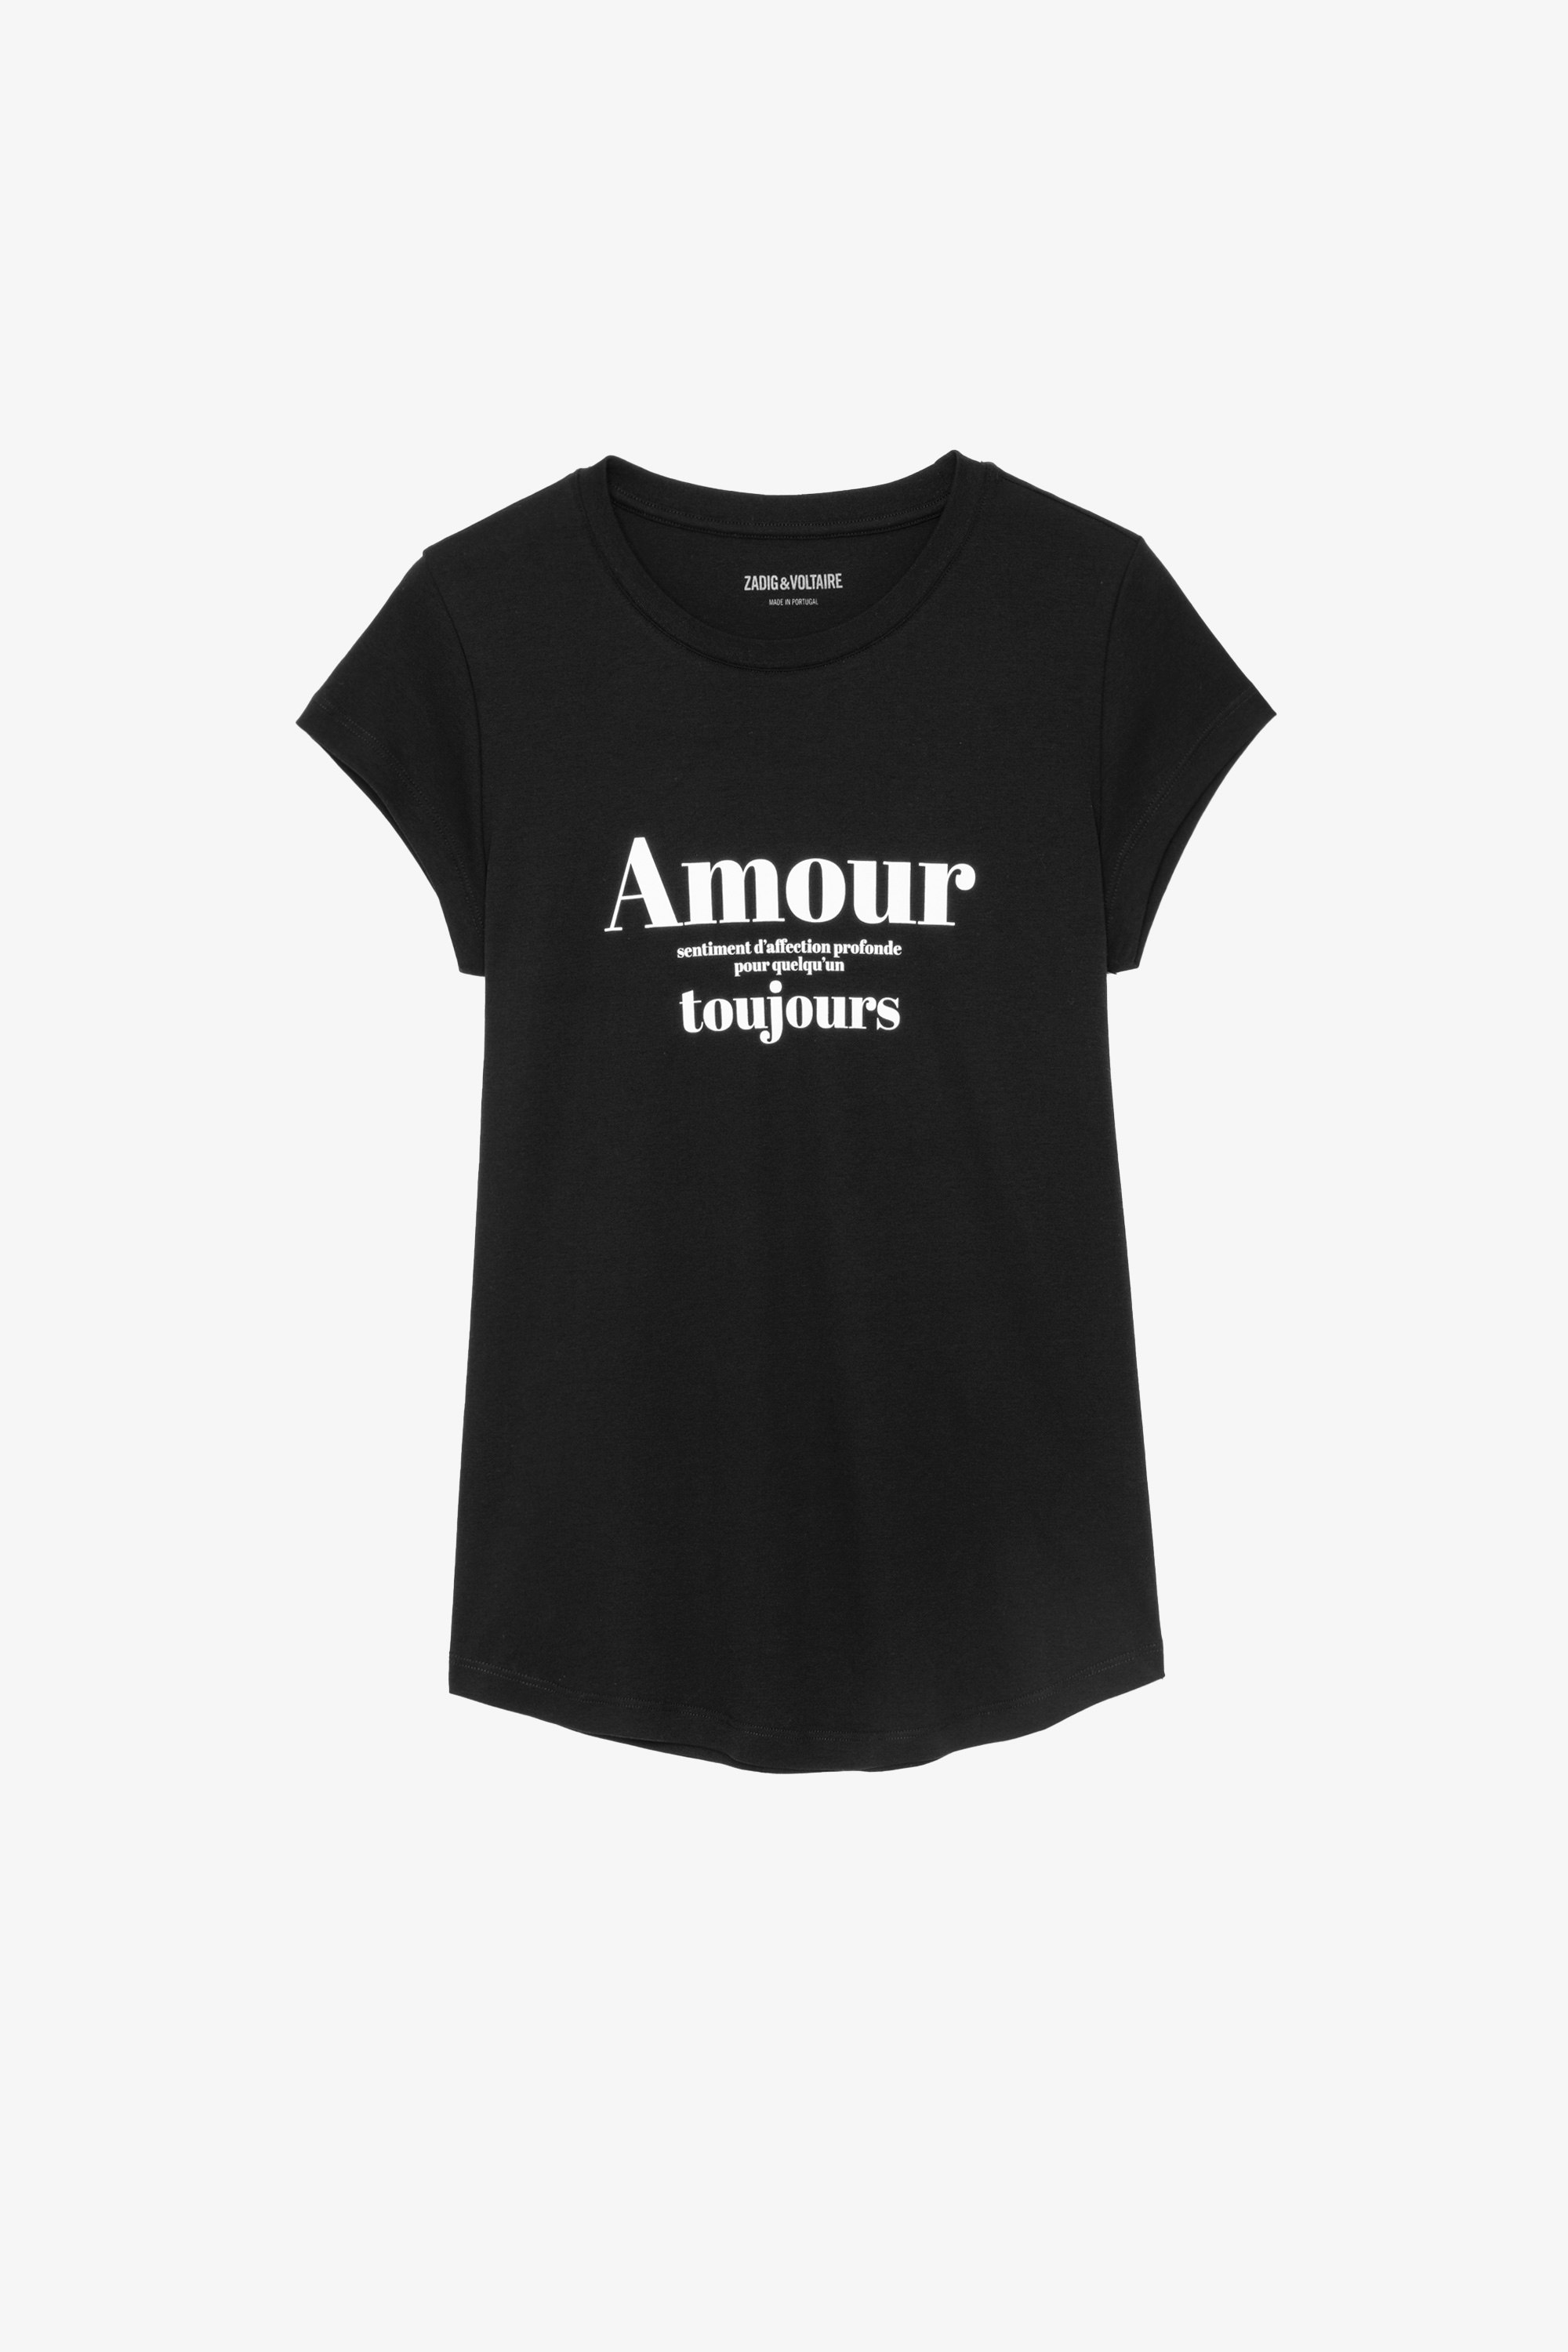 T-shirt Skinny Amour Toujours T-shirt in cotone nero con stampa “Amour Toujours” a contrasto, Donna